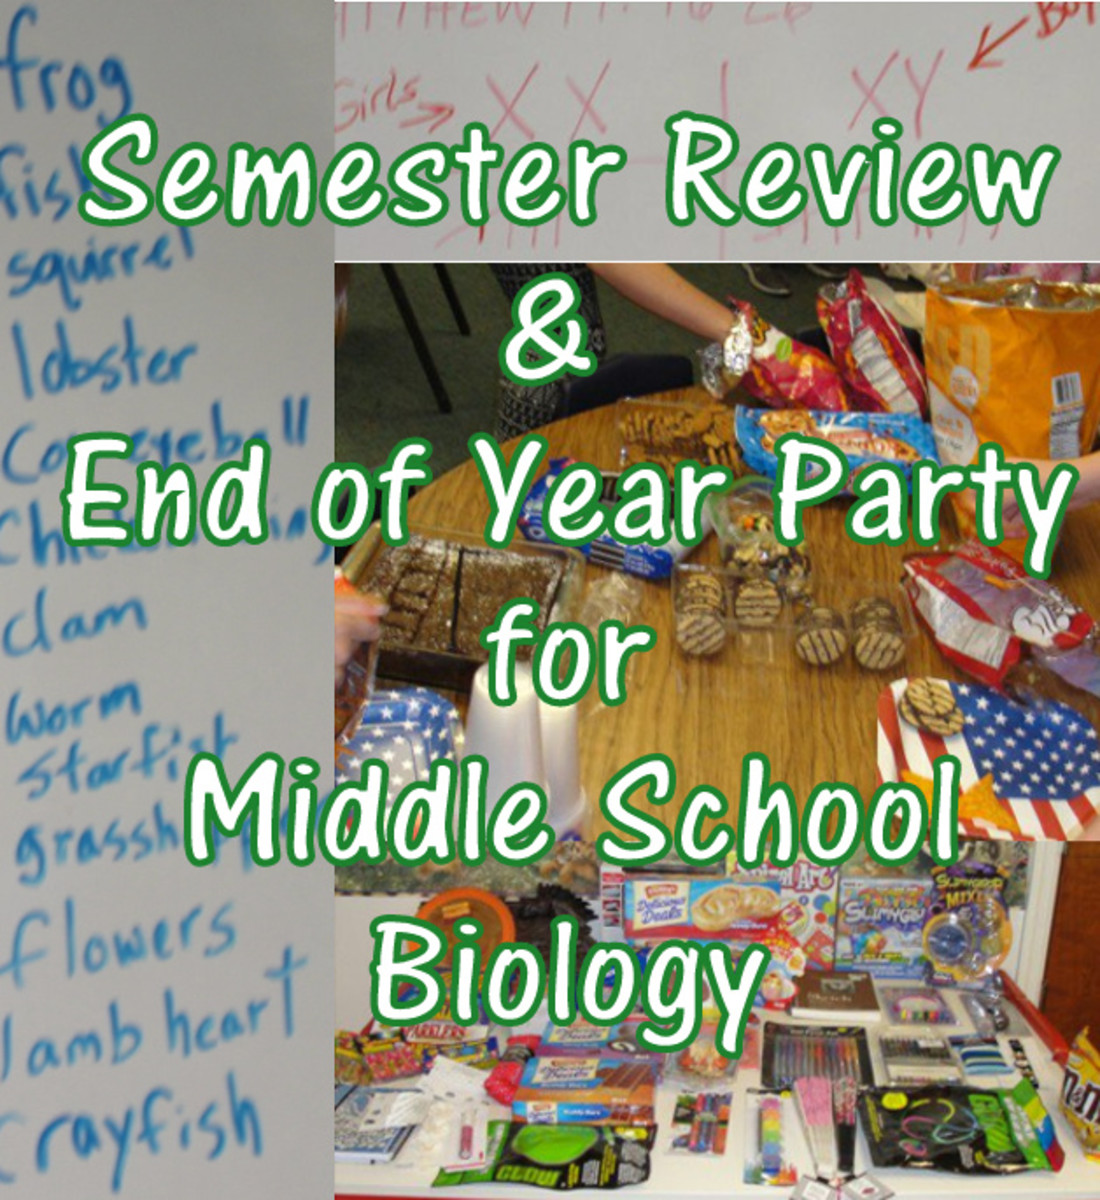 Semester Review & End of Year Party for Middle School Biology